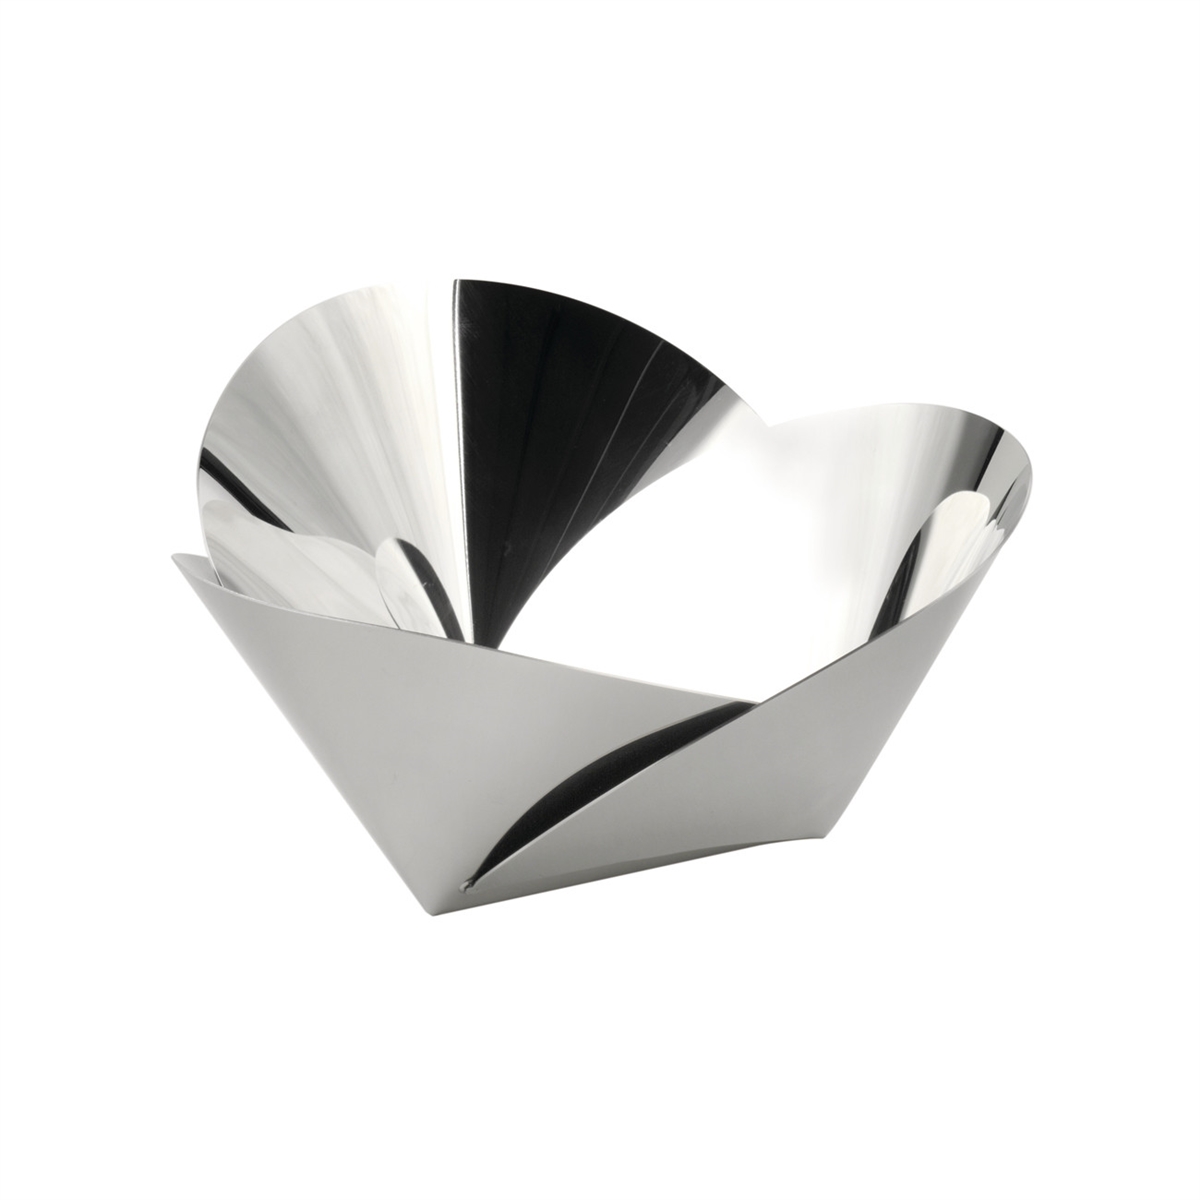 Alessi-Harmonic Basket in 18/10 stainless steel